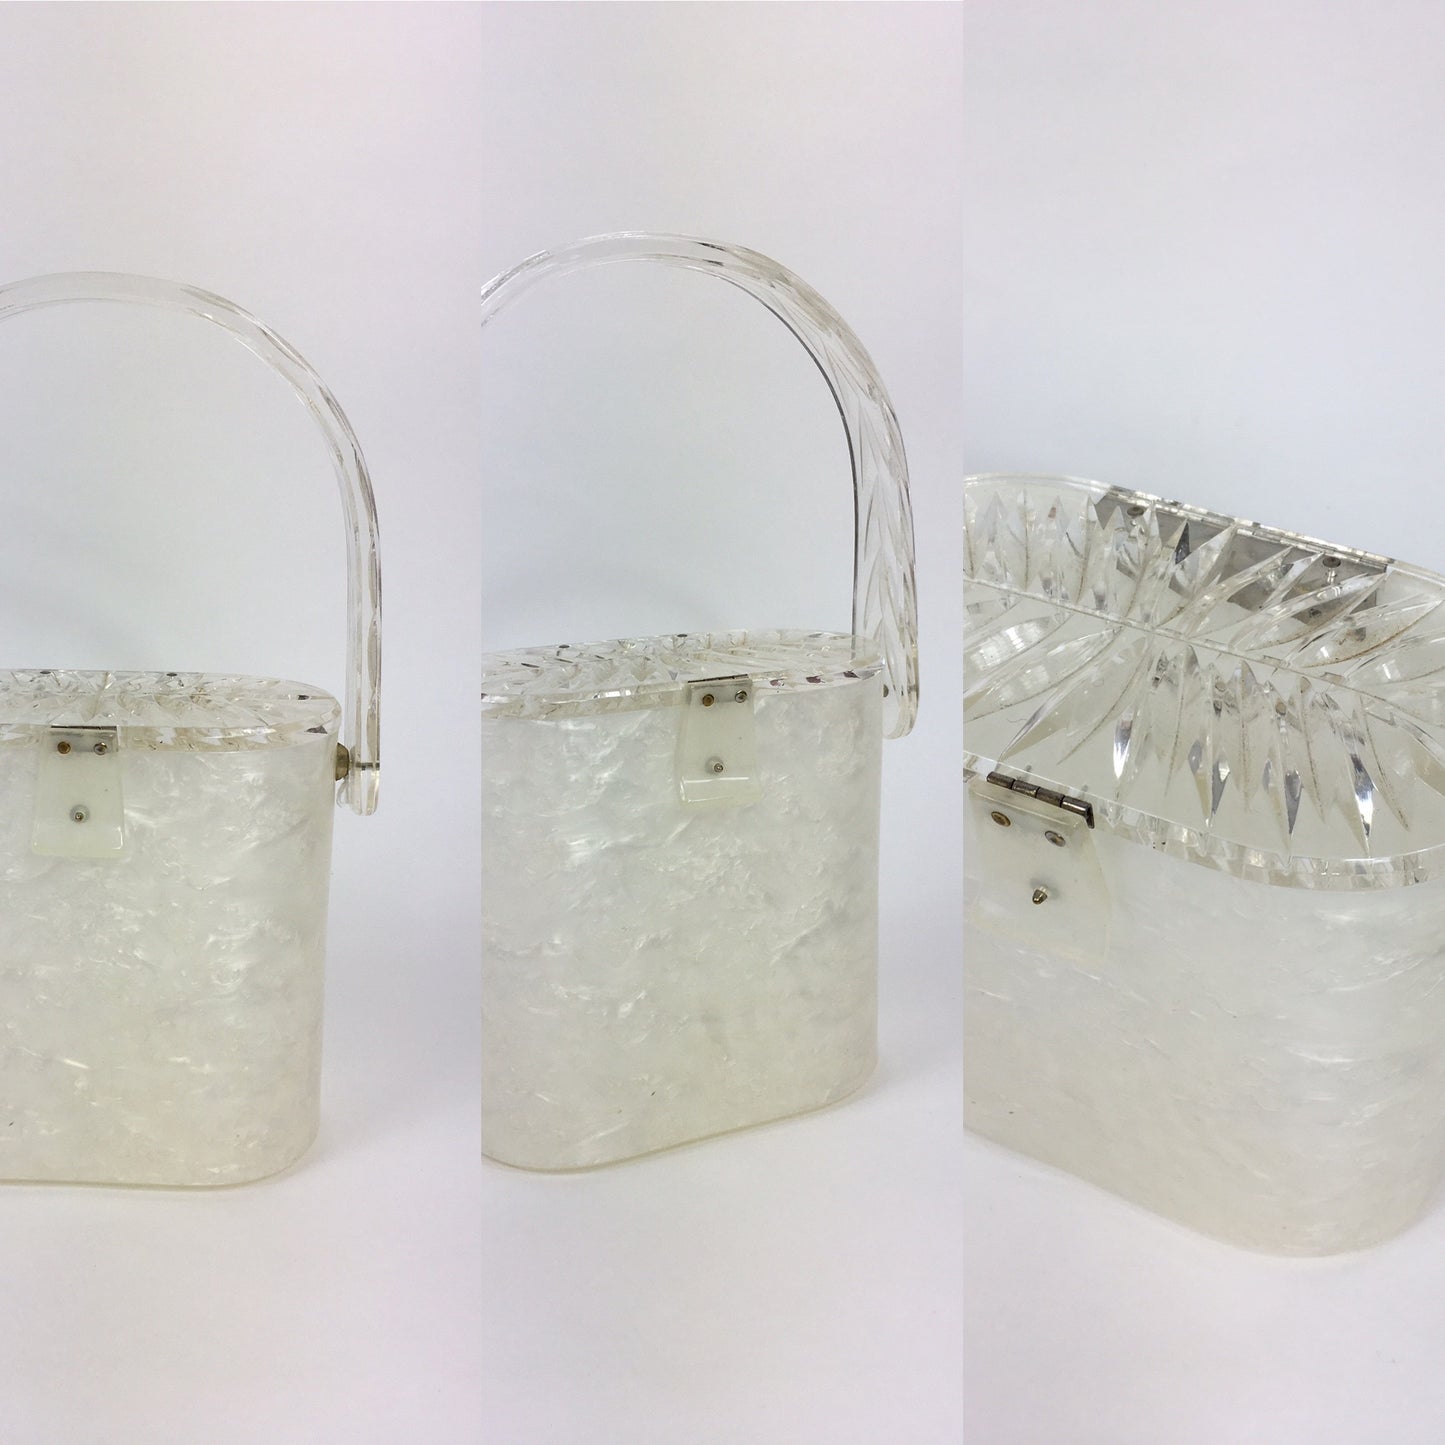 Original 1950s Lucite Handbag - White Marbled Base and Clear Leaf Design Lucite Lid and Handle